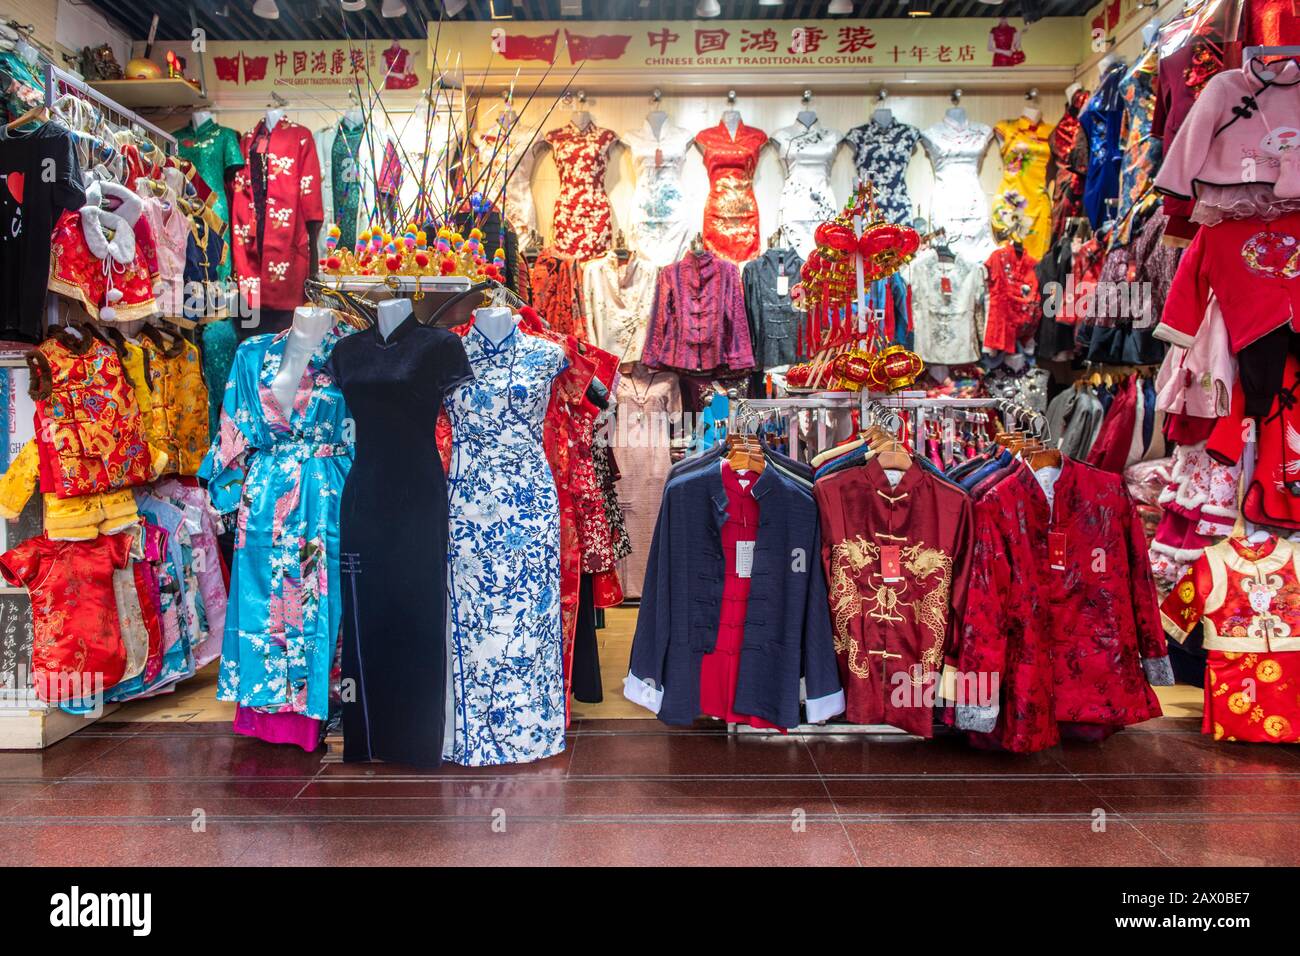 A store featuring a variety of colorful traditional apparel for women,  Shanghai, China Stock Photo - Alamy